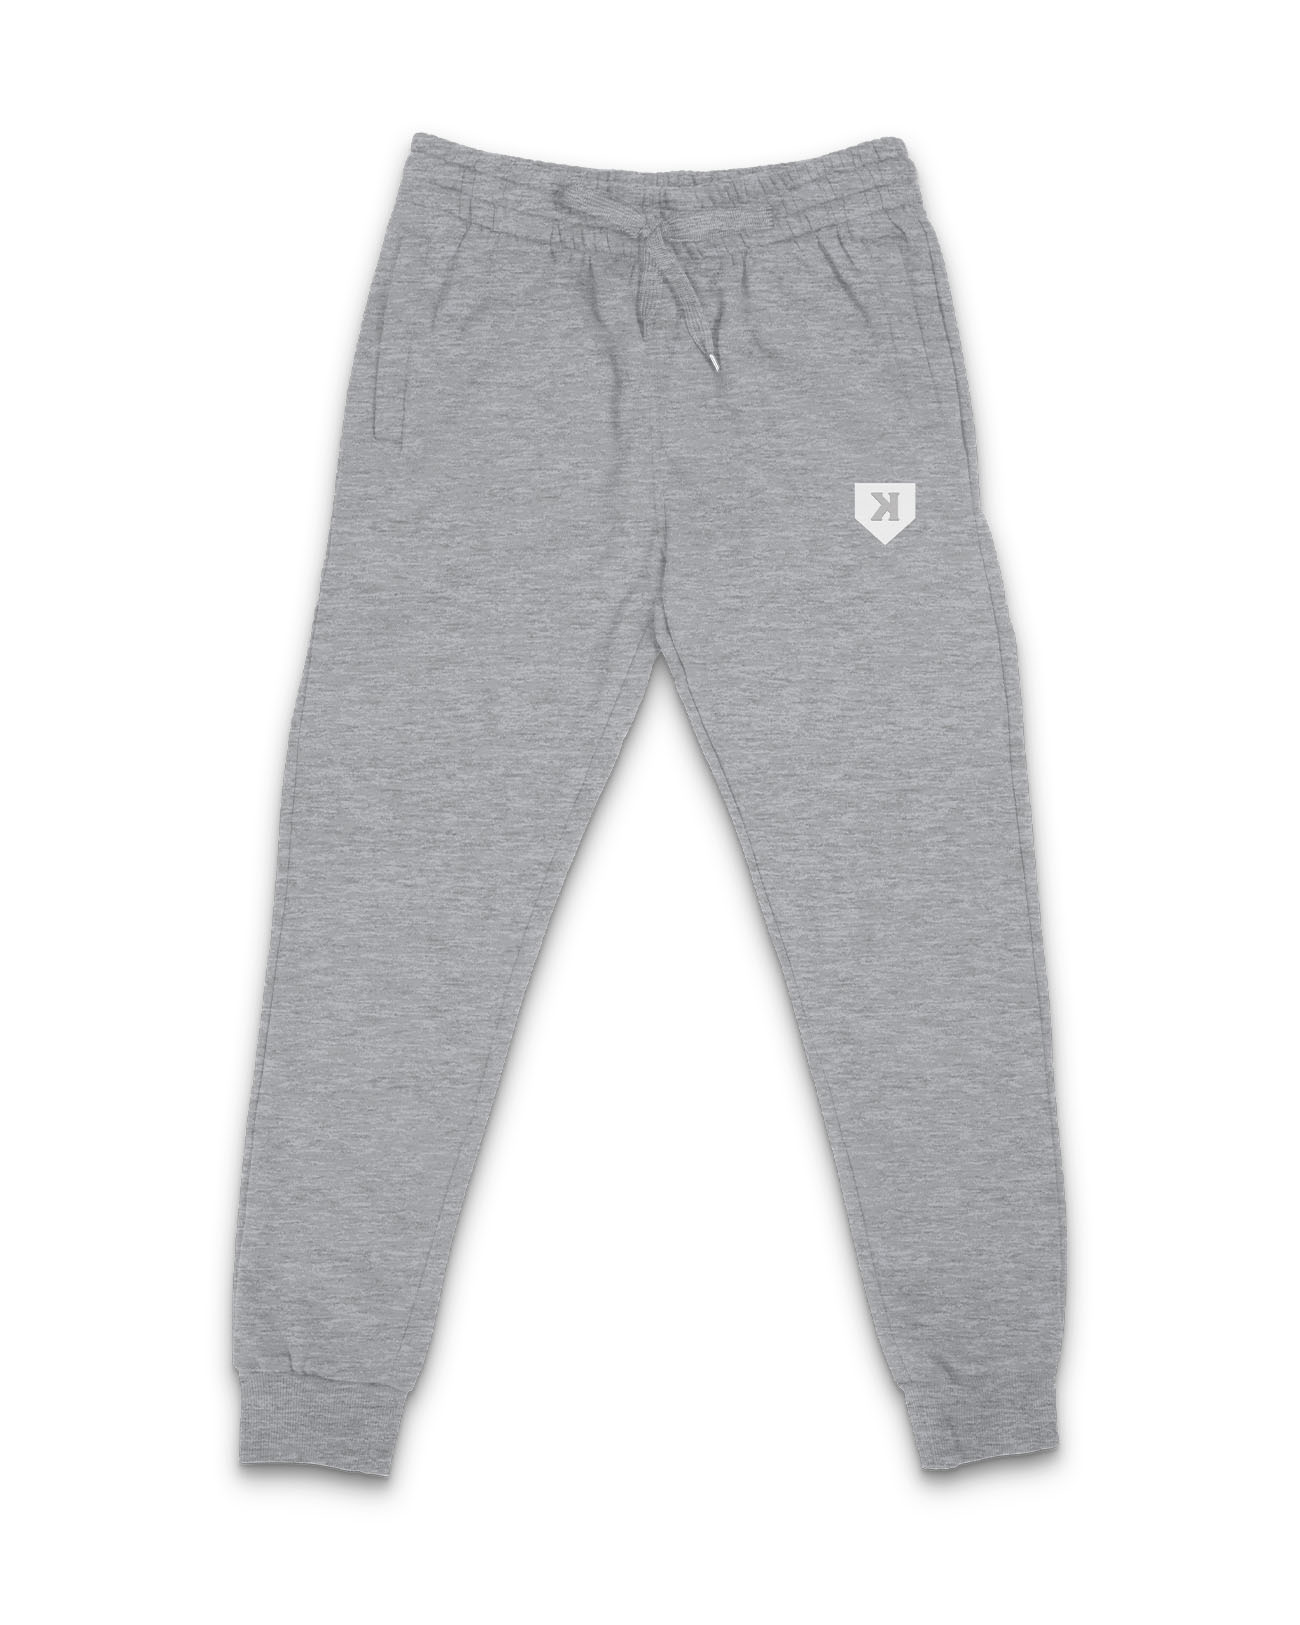 YOUTH Gray Performance Joggers